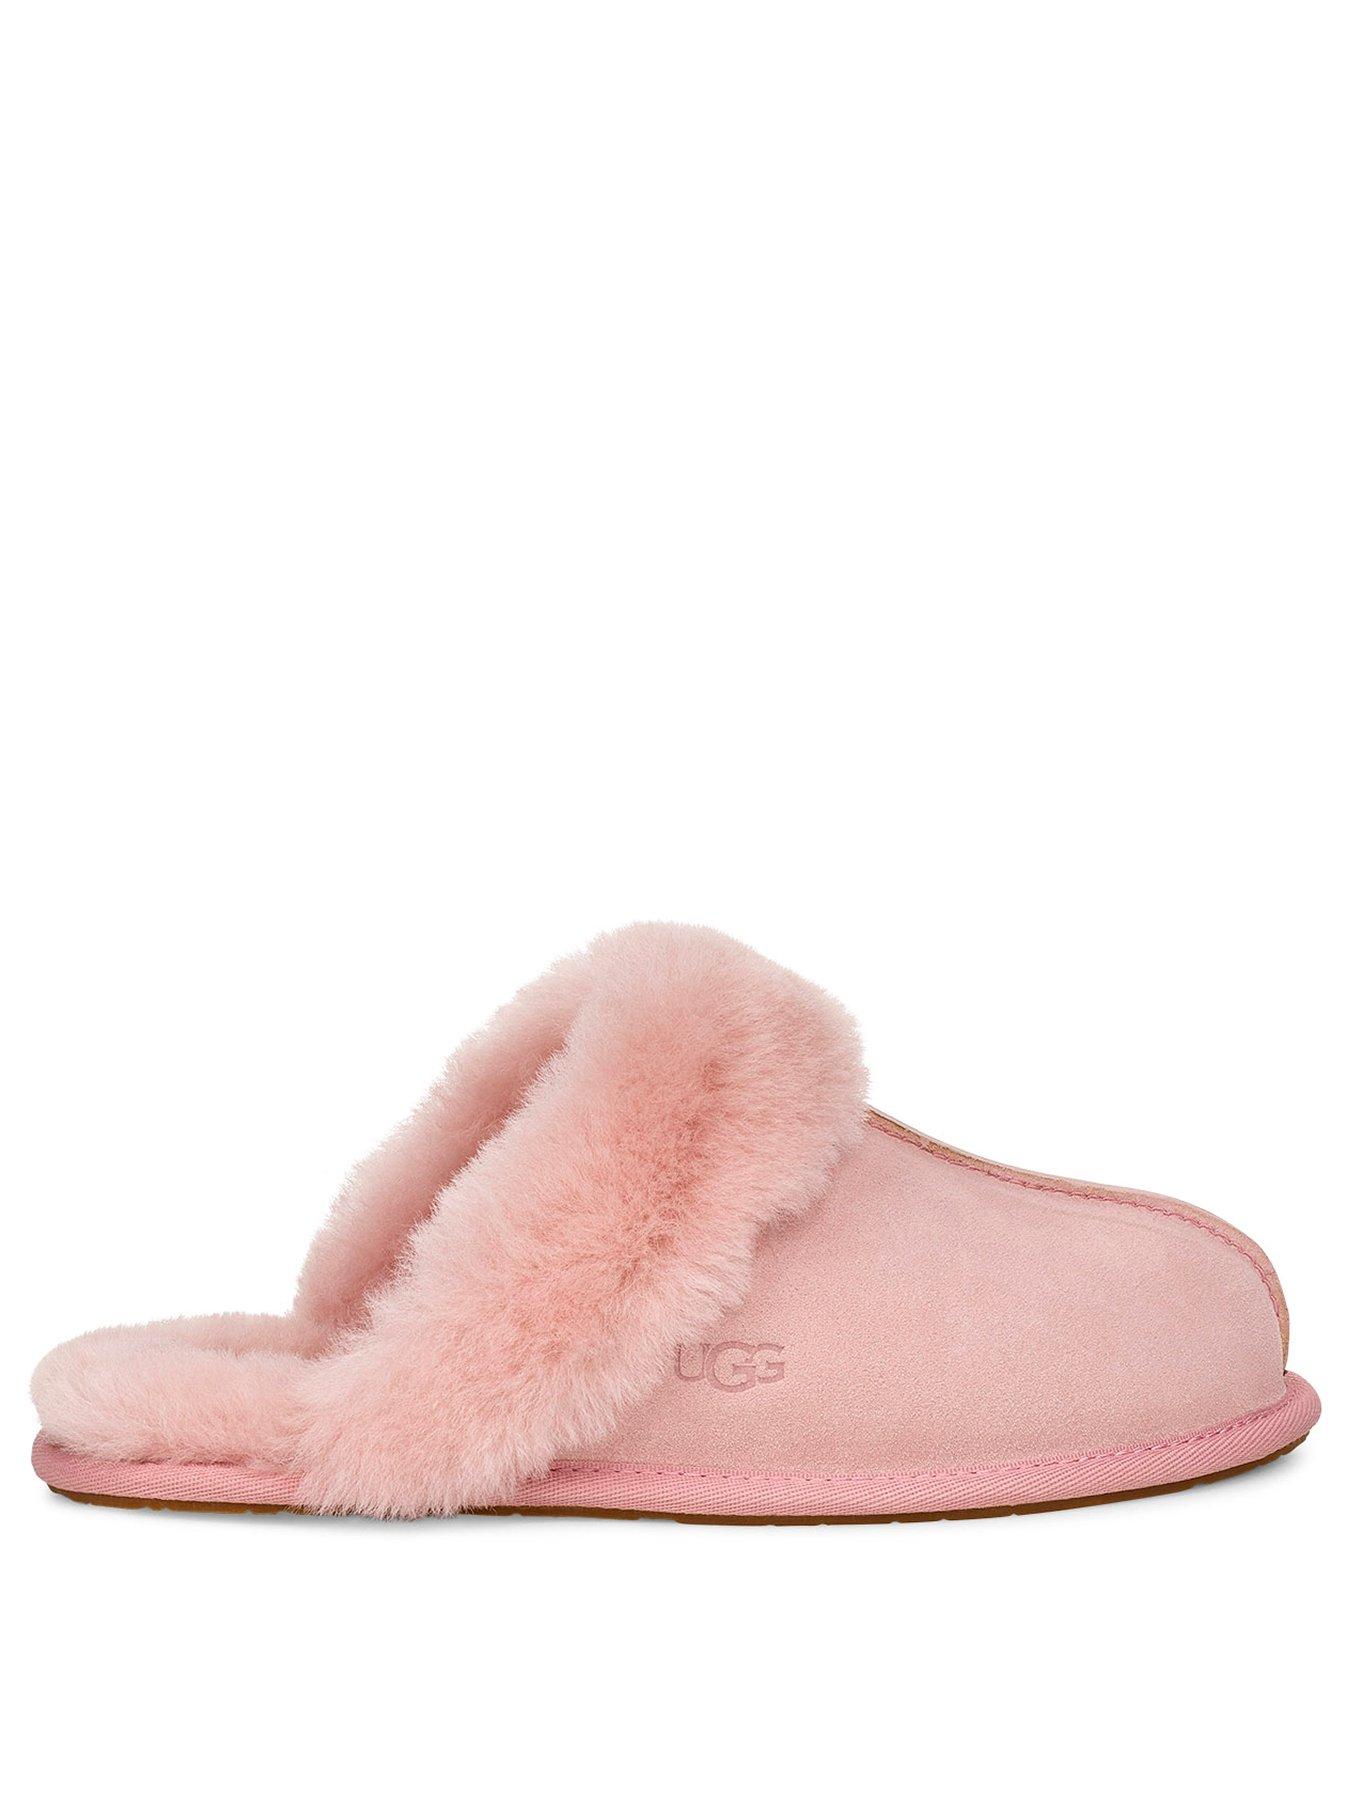 pink ugg slippers size 5